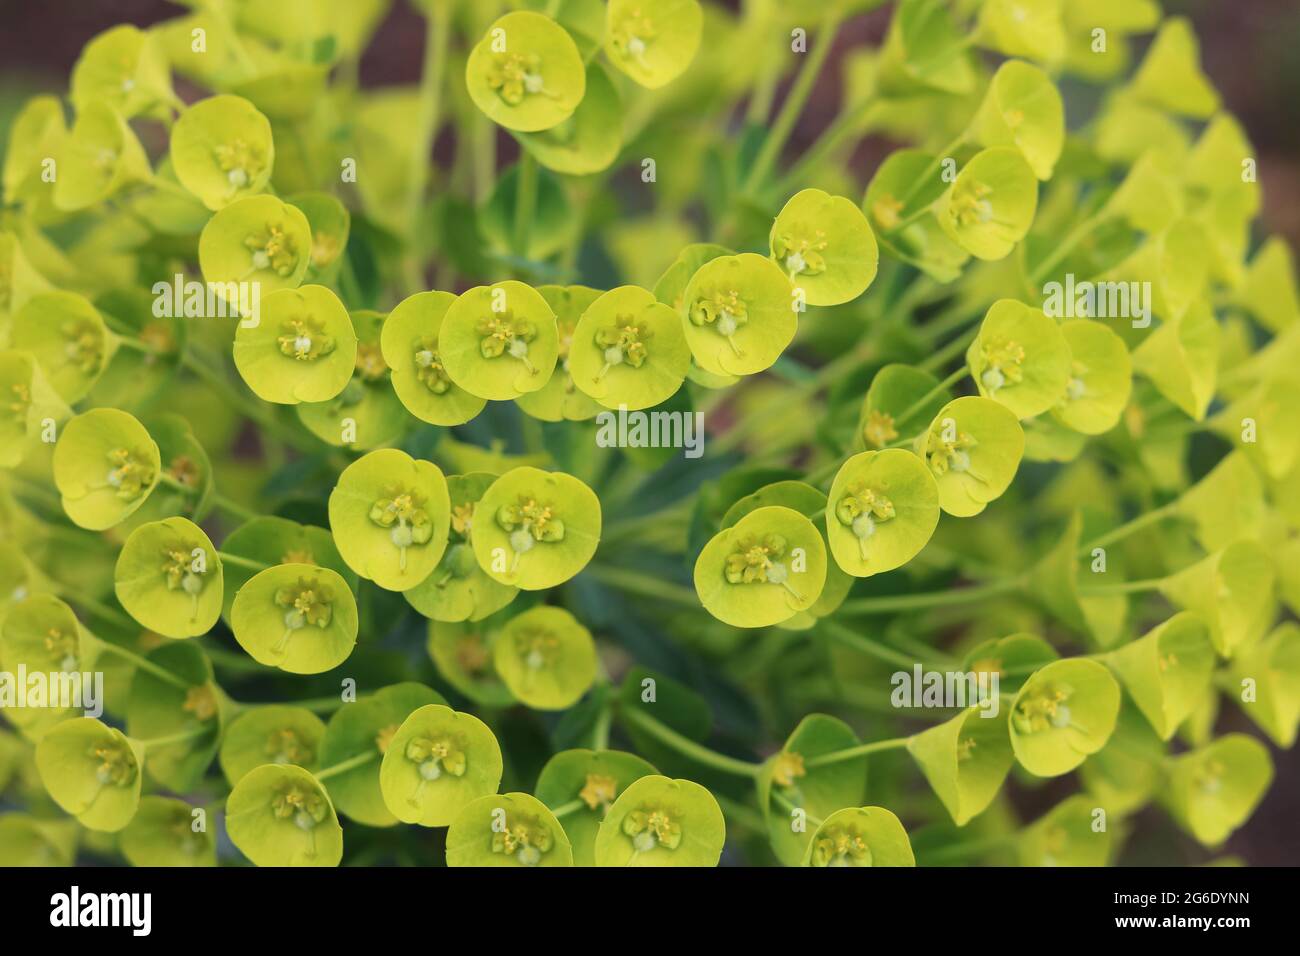 Full frame image of euphorbia foliage in shades of yellow green Stock Photo